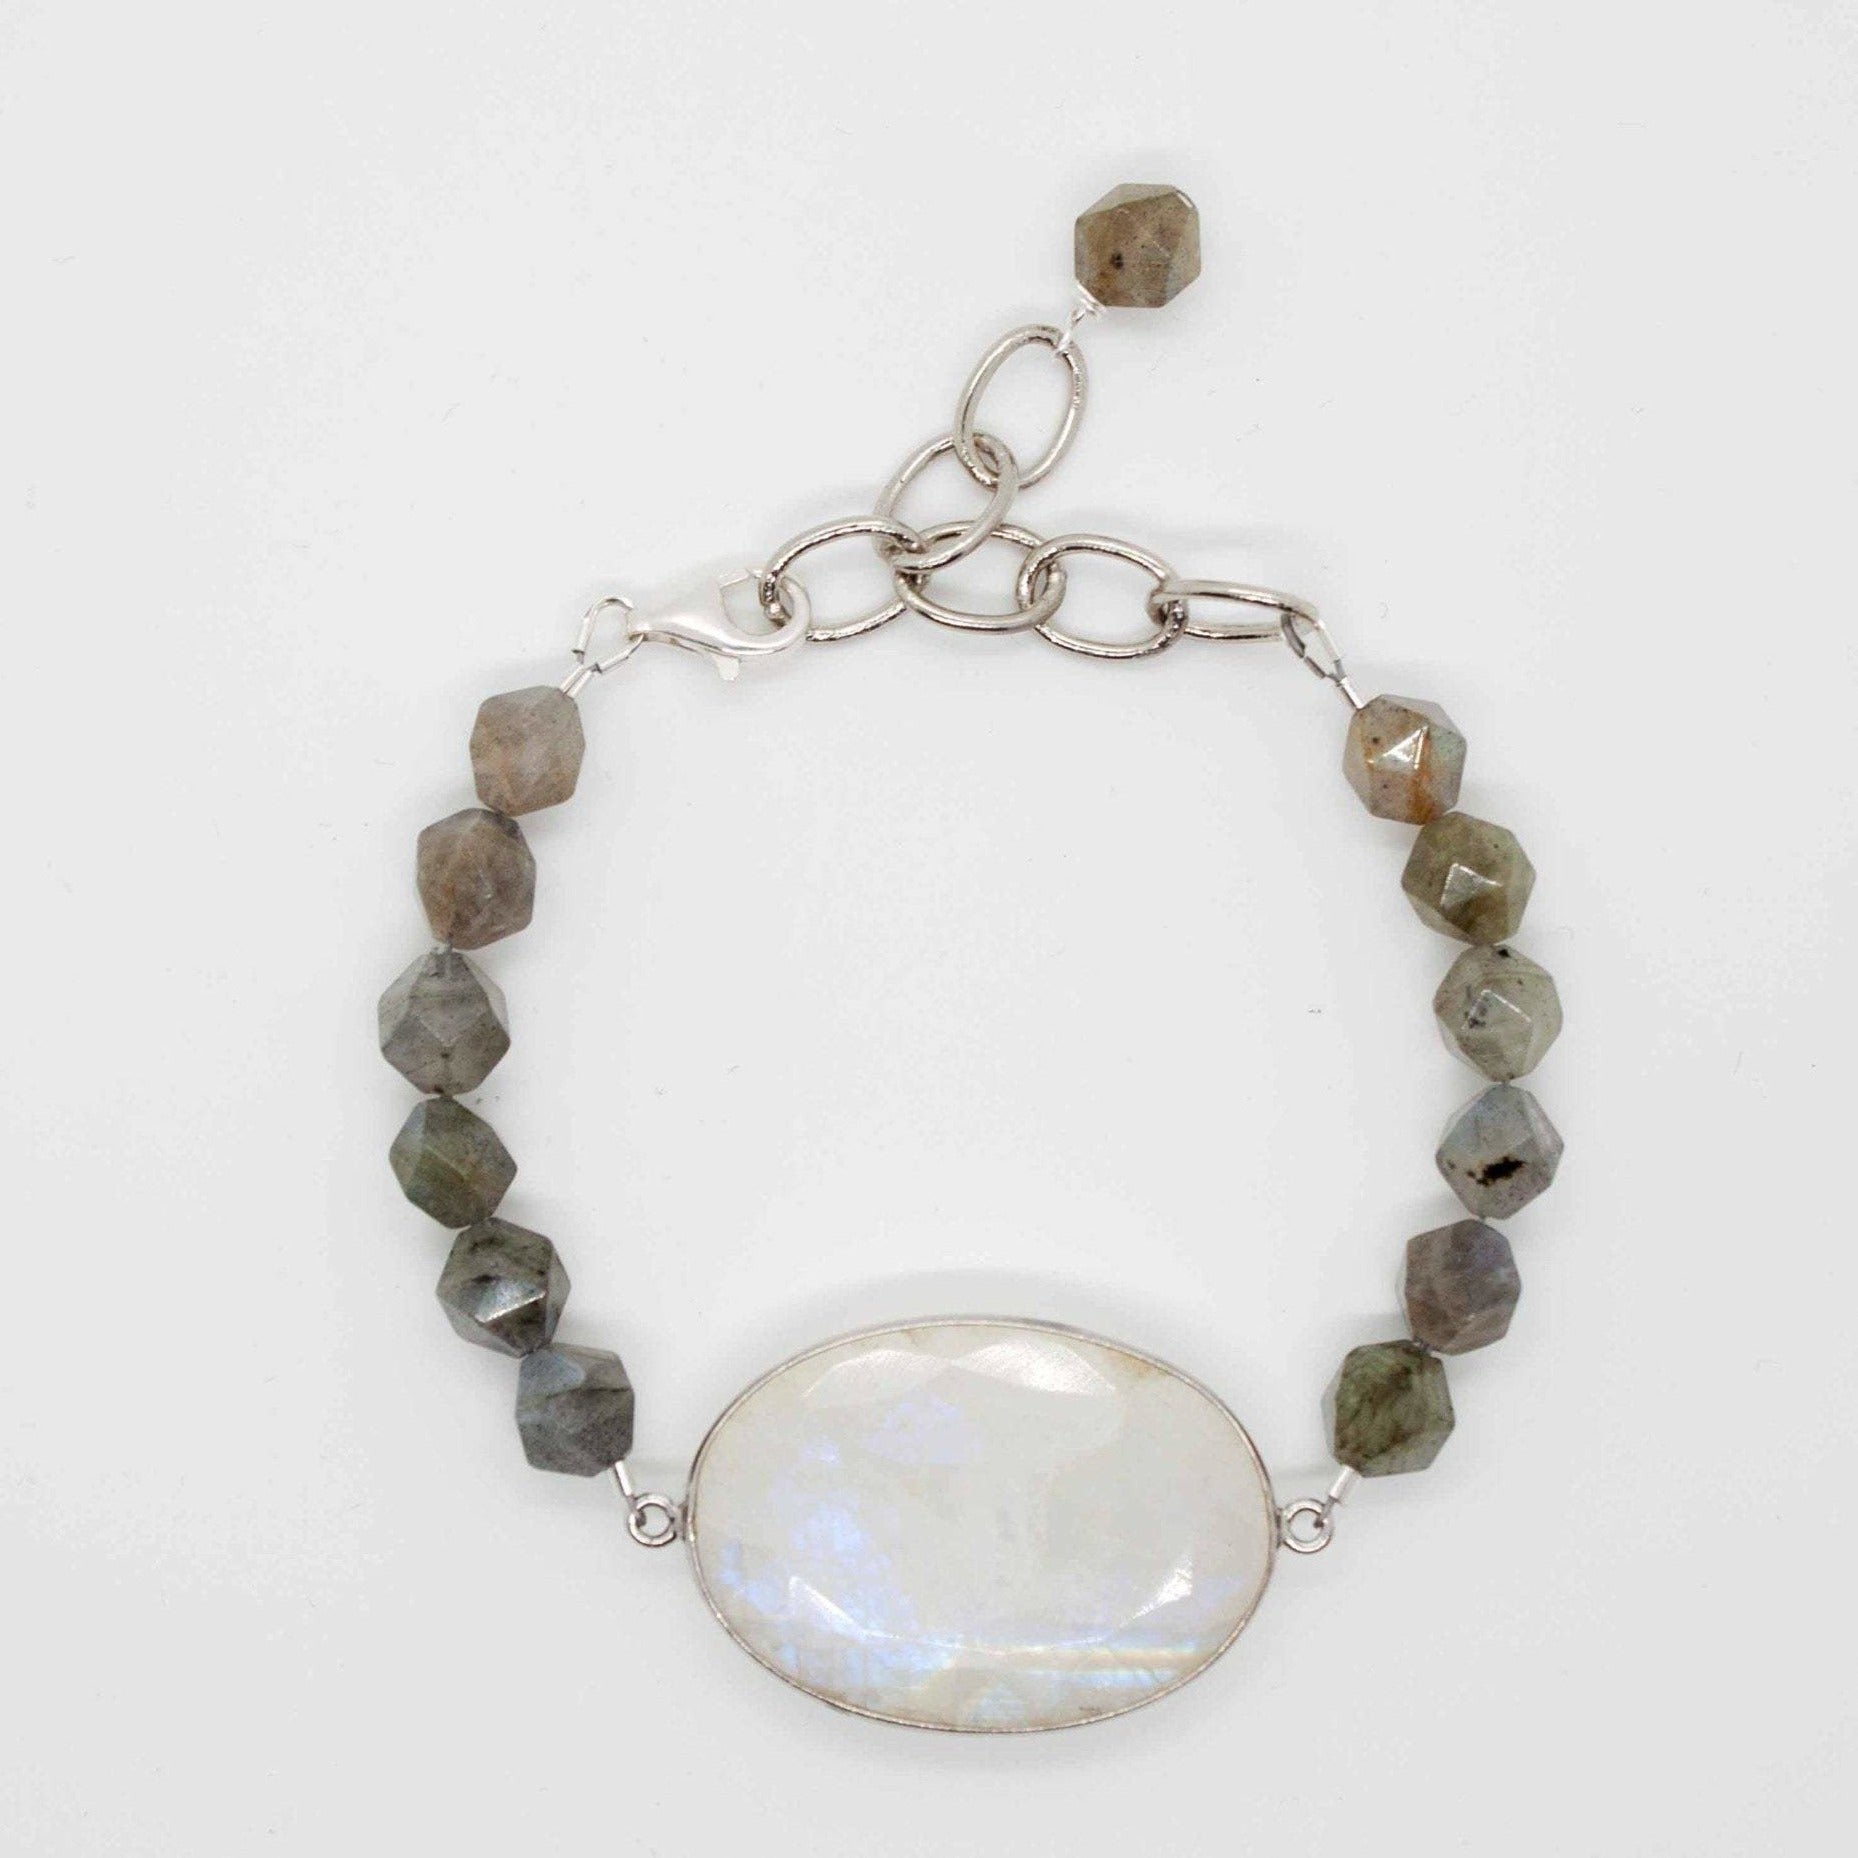 Cadence bracelet stack: 3 beaded bracelets made from labradorite, lava, hematite and sterling silver beads. Labradorite bracelet has large rainbow moonstone pendant and adjustable sterling silver lobster clasp.